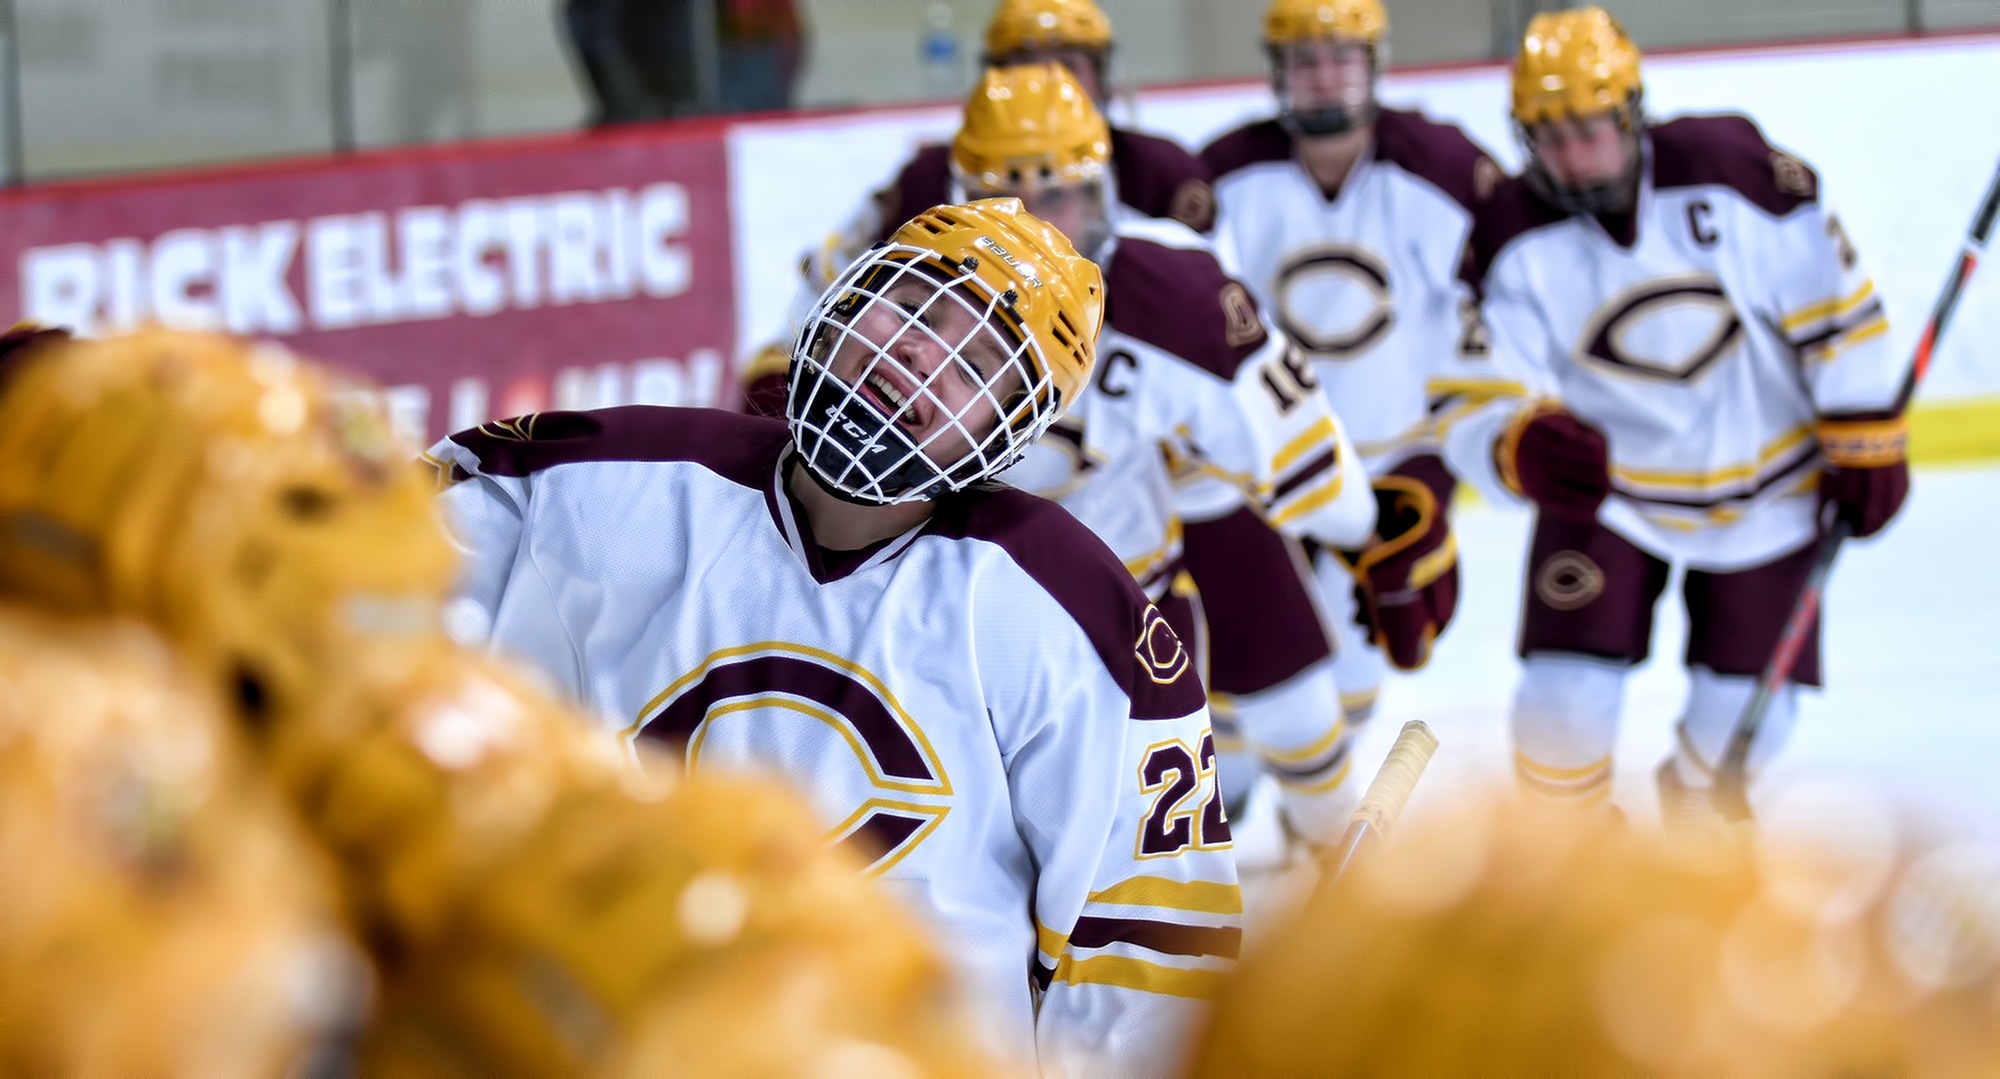 Sophomore Libby Hinrichs is all smiles after scoring her second goal of the game in the Cobbers 5-4 win over St. Olaf.